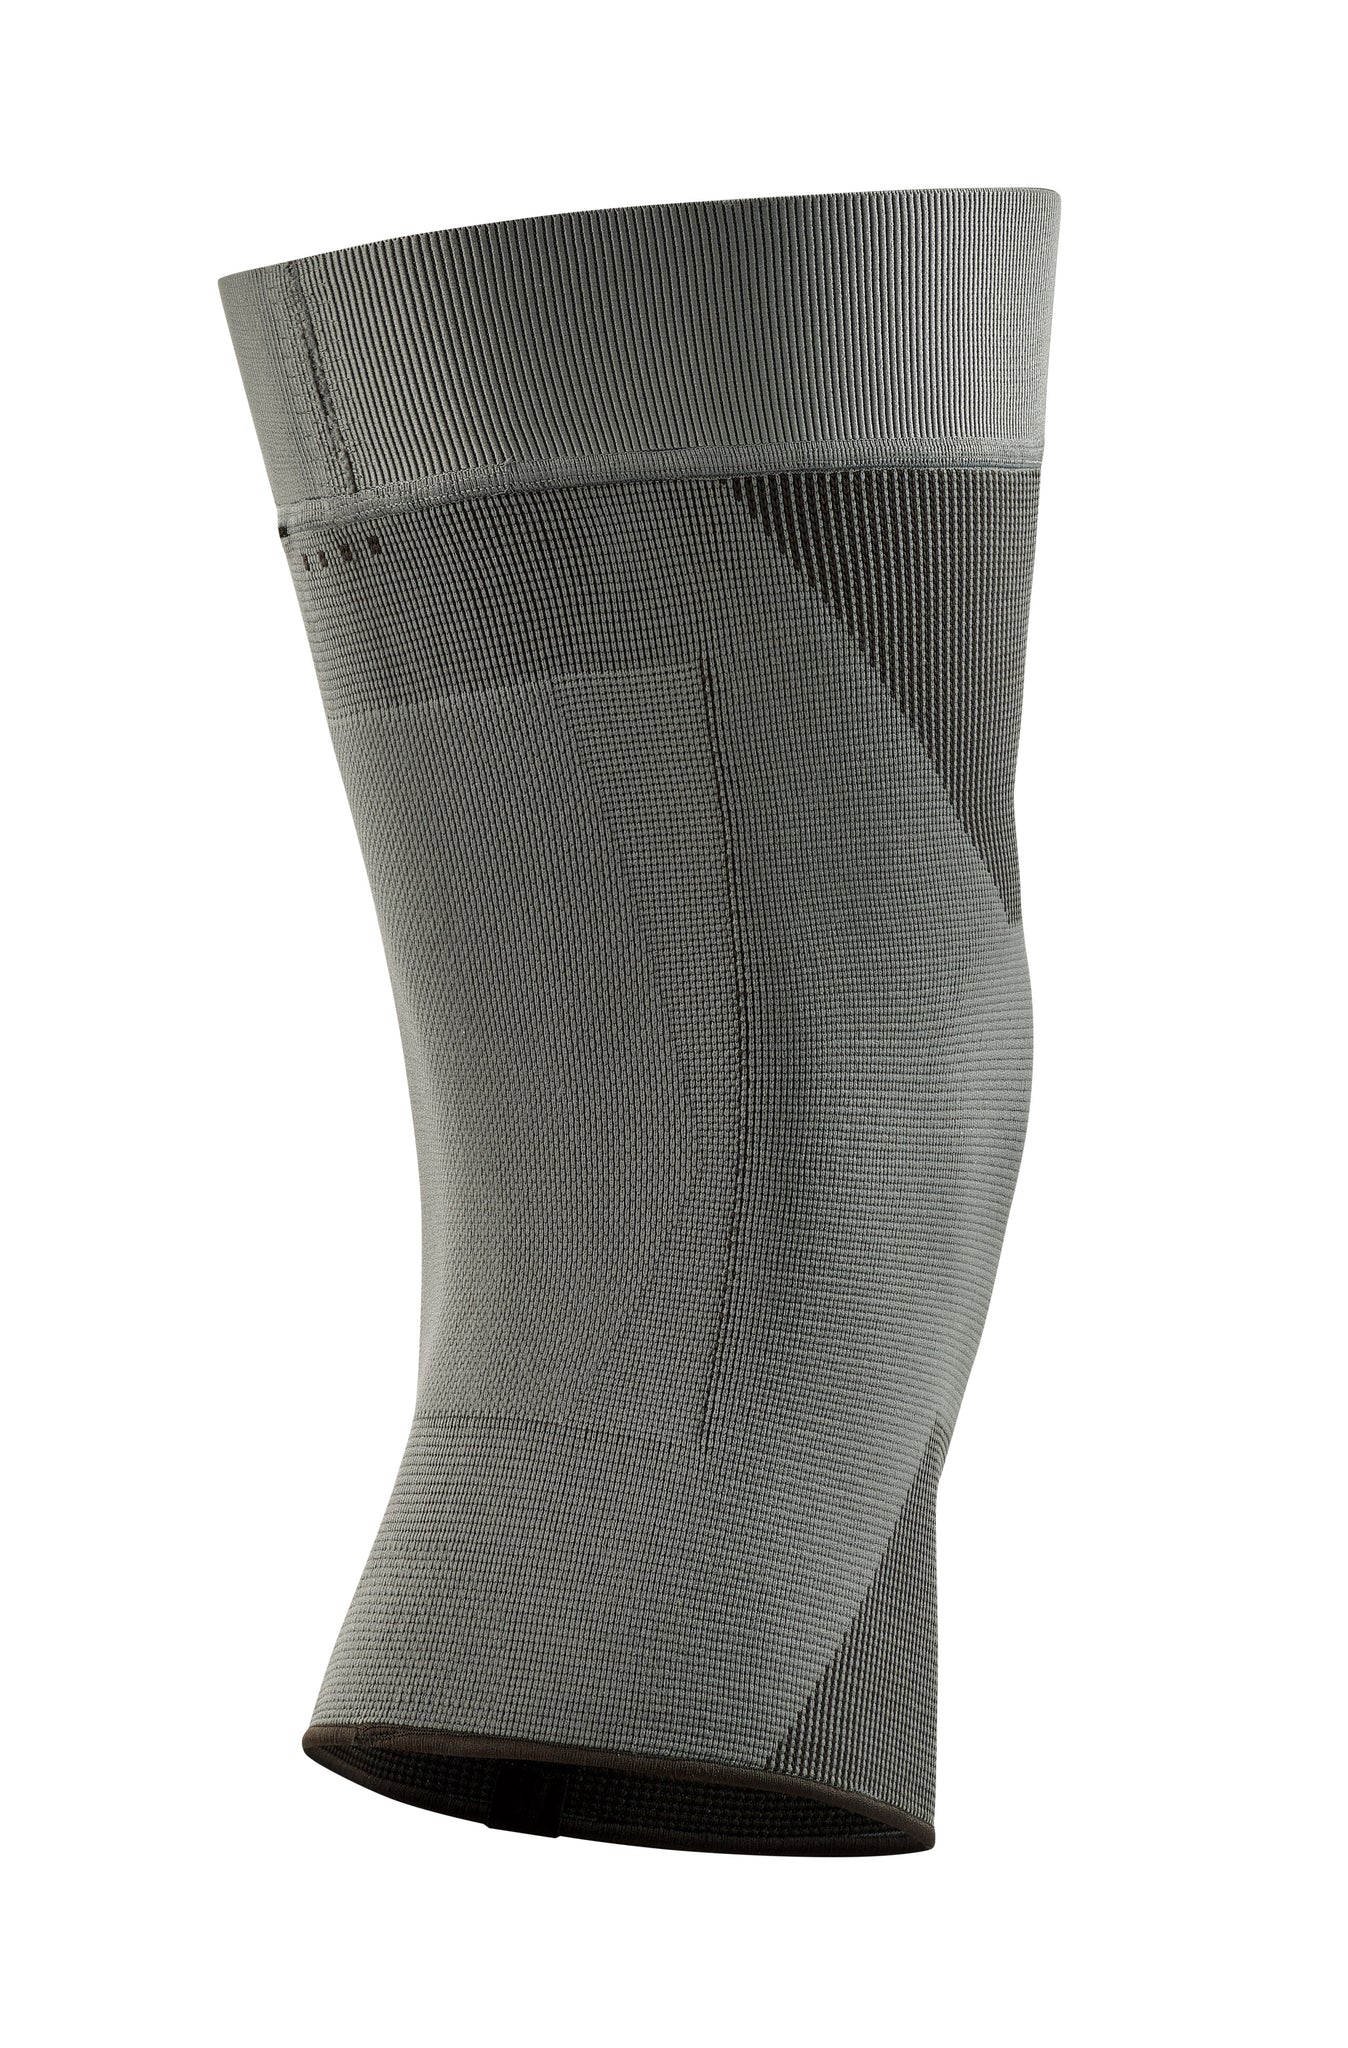 CEP Mid Support Compression Knee Sleeve